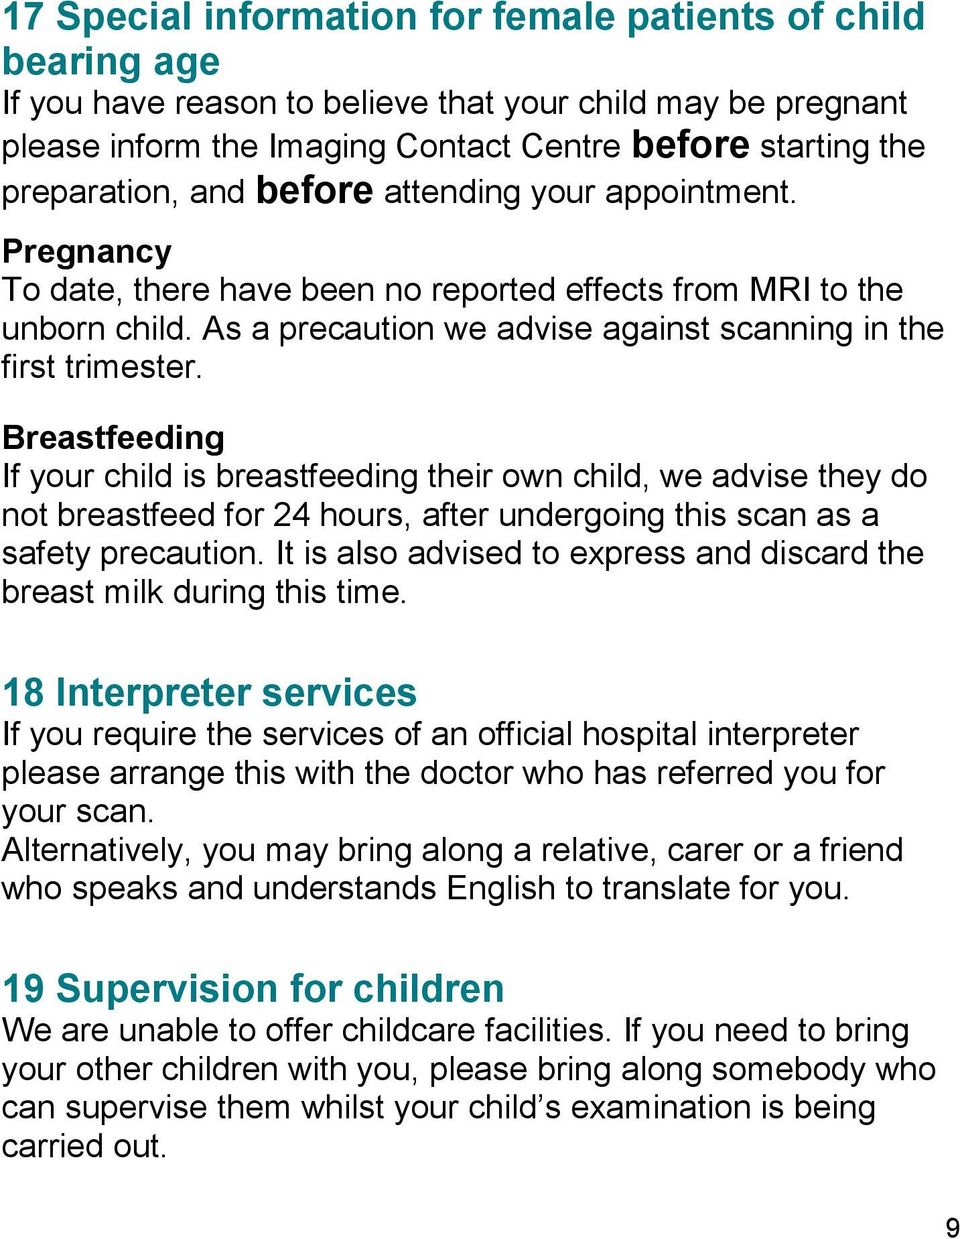 Breastfeeding If your child is breastfeeding their own child, we advise they do not breastfeed for 24 hours, after undergoing this scan as a safety precaution.